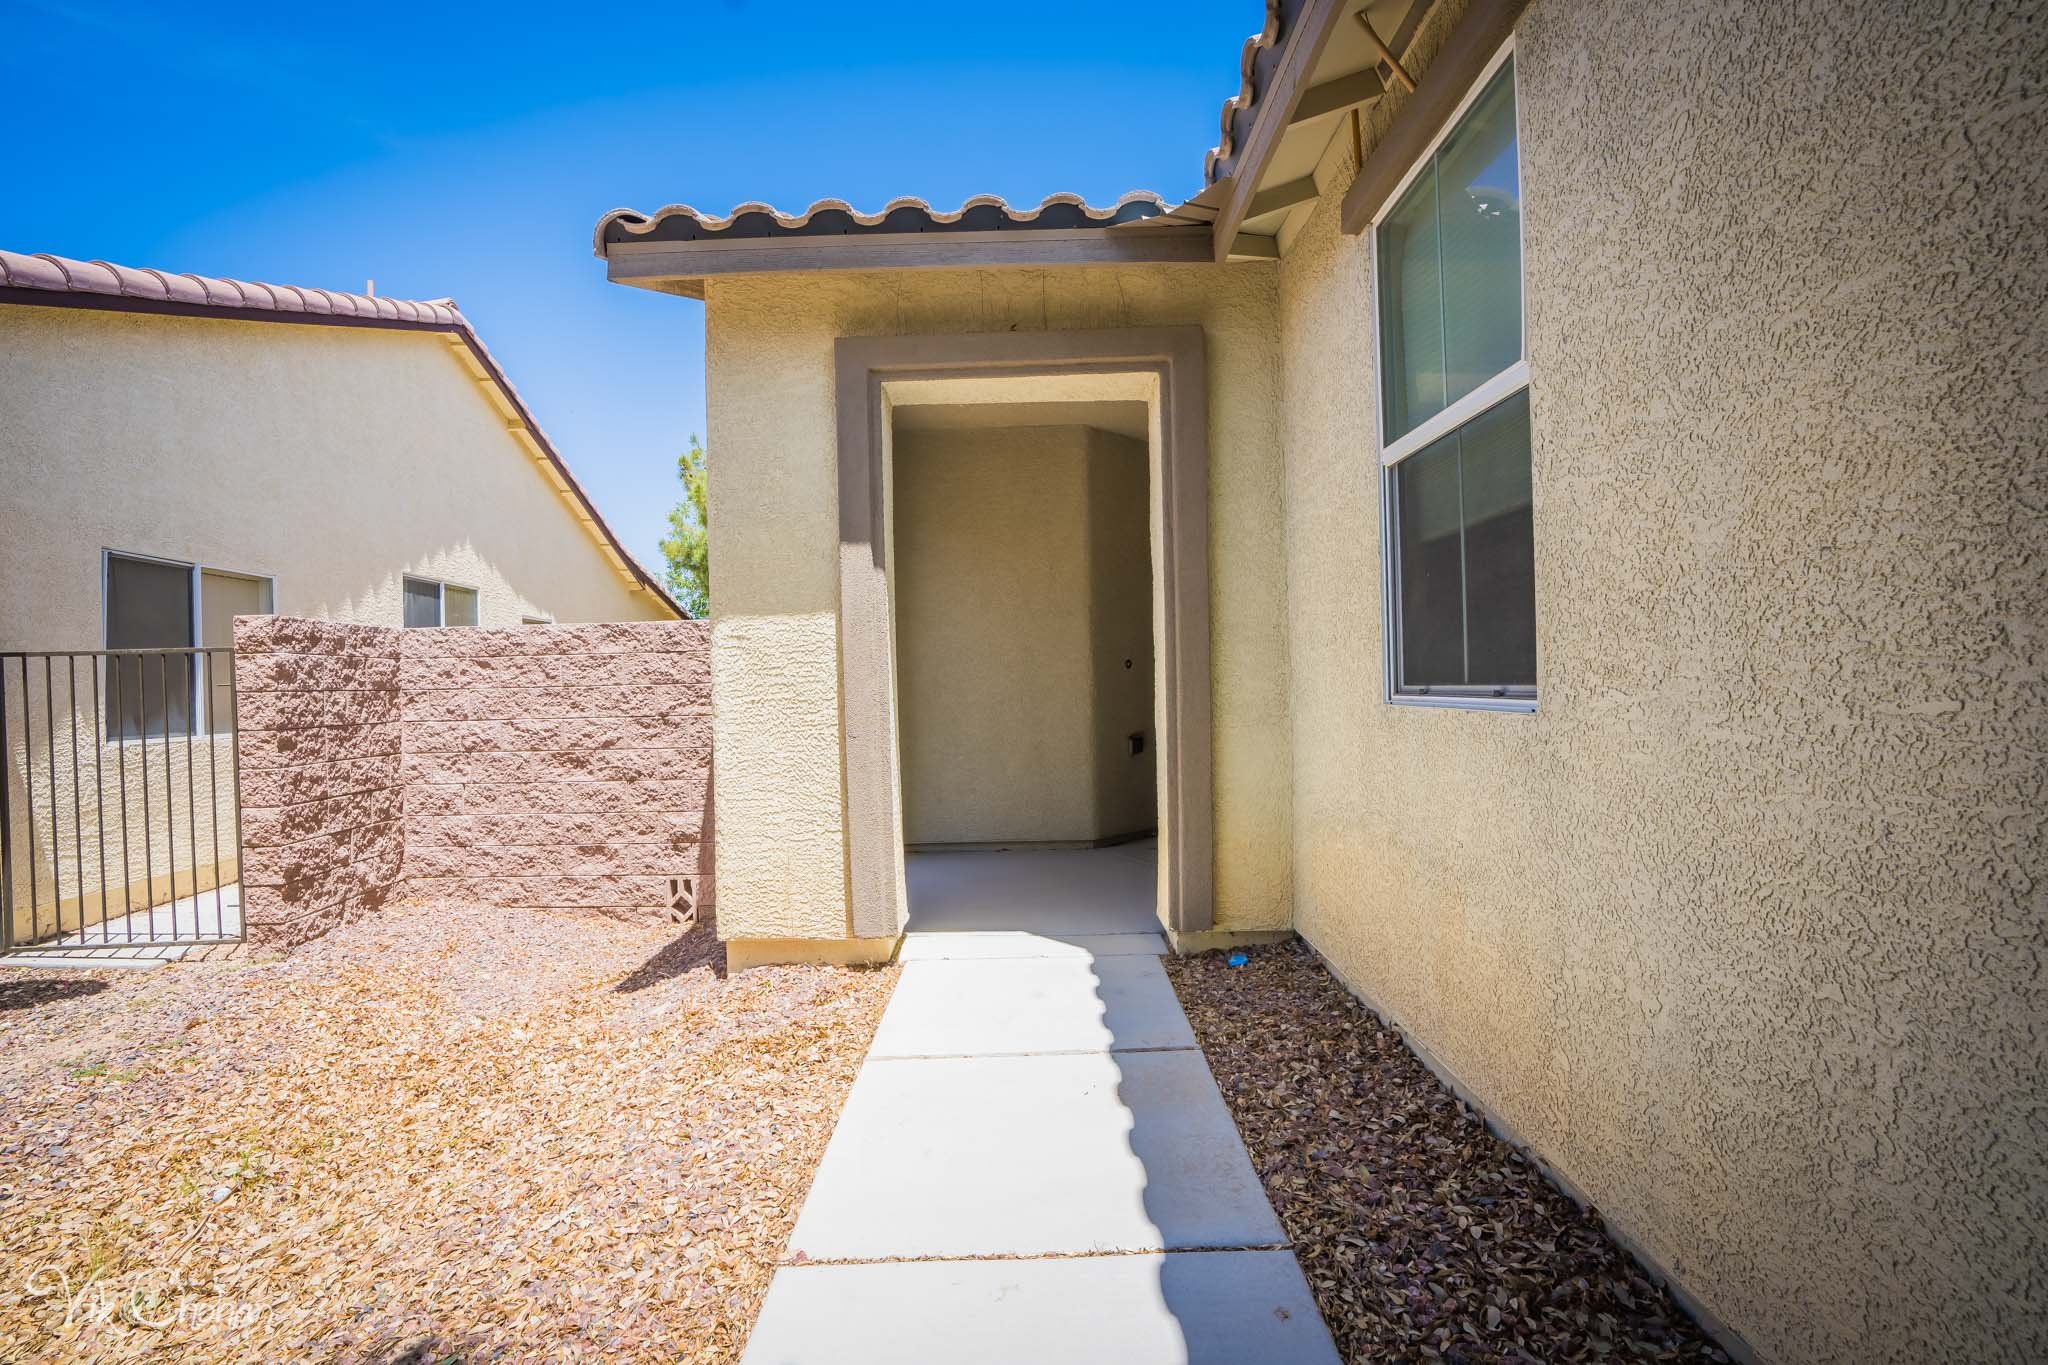 2022-05-15-5378-E-Cansano-St-Pahrump-Real-Estate-Photography-Virtual-Tour-Drone-Photography-Vik-Chohan-Photography-Photo-Booth-Social-Media-VCP-009.jpg